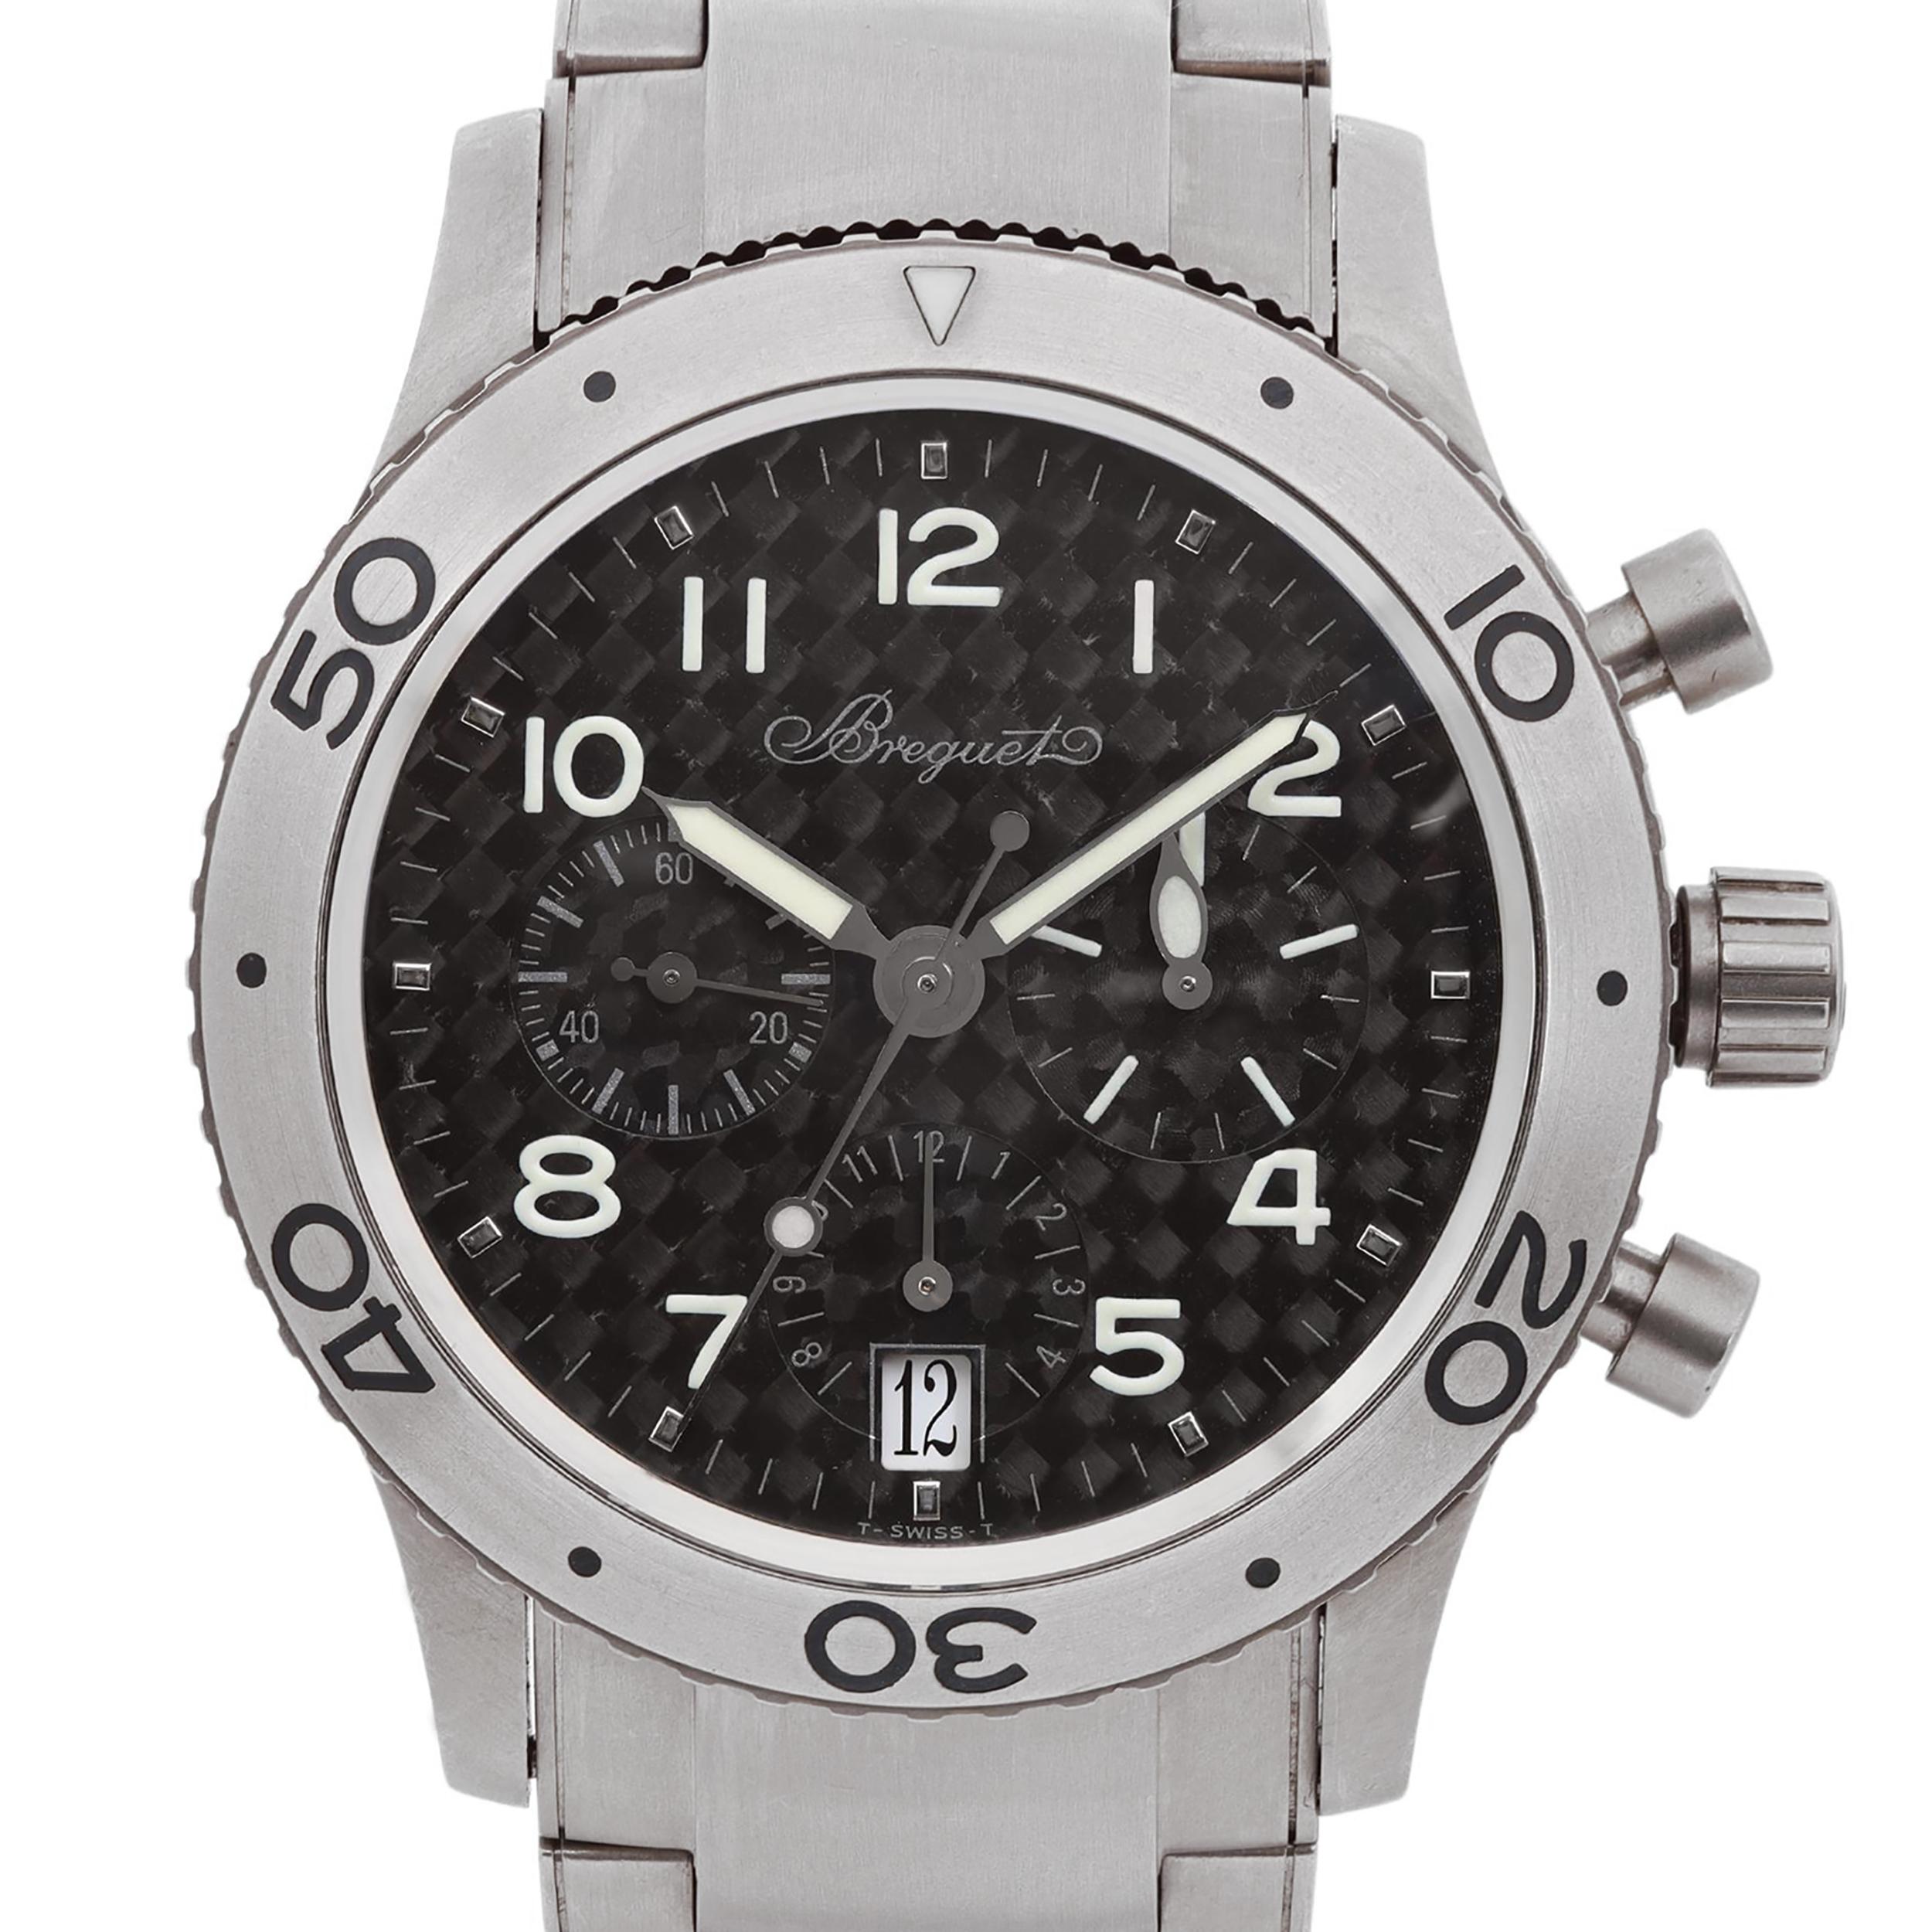 Great pre-owned condition, recently serviced. No original box and papers are included. Comes with a gift box and the seller's warranty card. 

 Brand: Breguet  Type: Wristwatch  Department: Men  Model Number:  3820TI/K2/TW9  Country/Region of